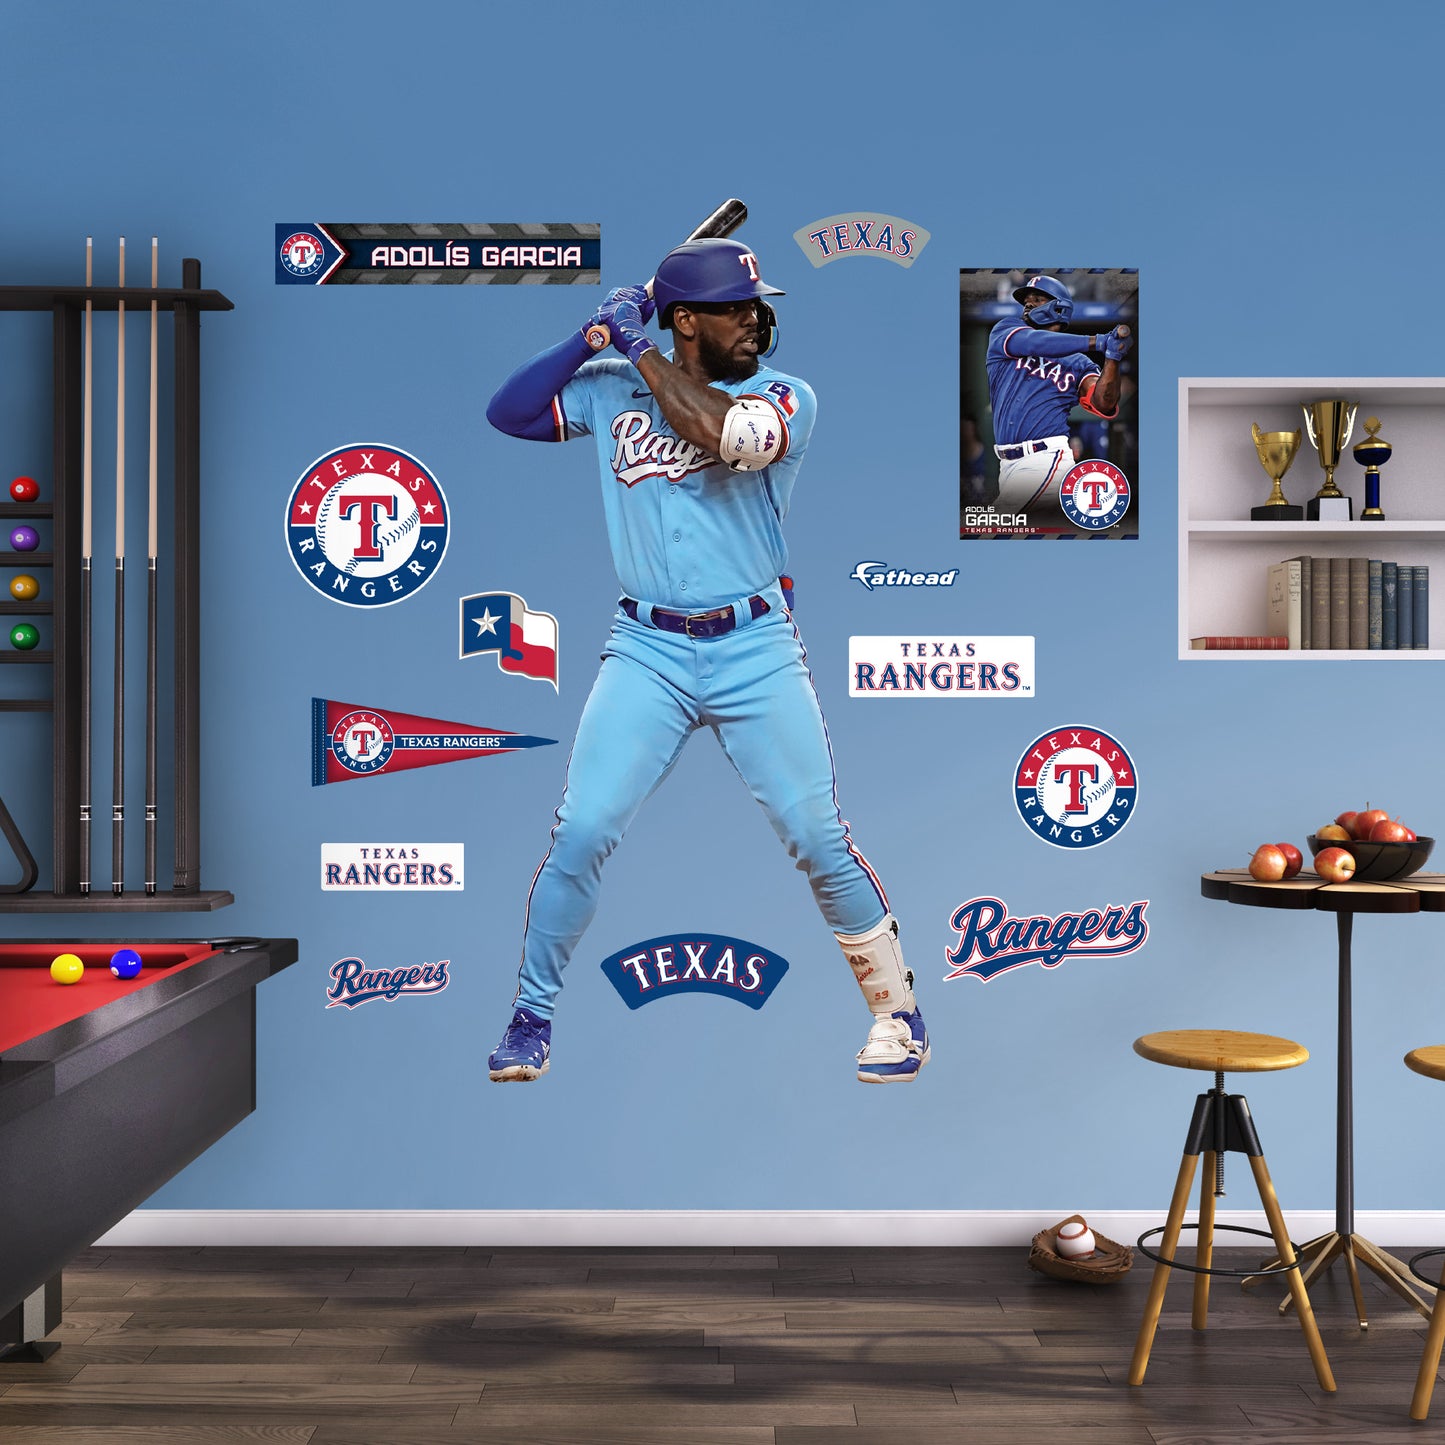 Texas Rangers: Adolís Garcia 2023        - Officially Licensed MLB Removable     Adhesive Decal